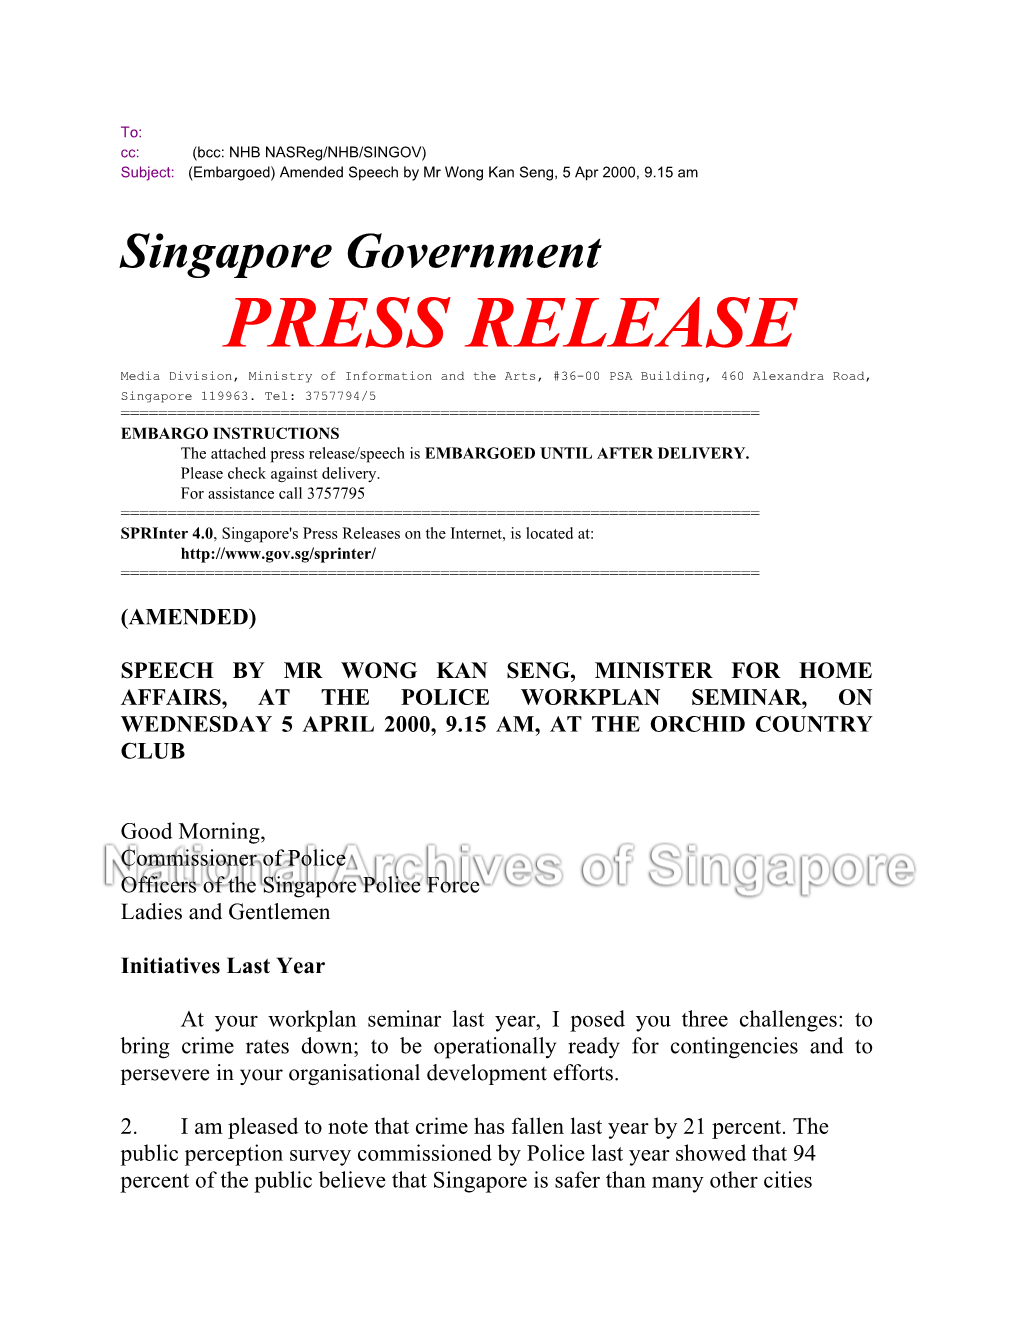 PRESS RELEASE Media Division, Ministry of Information and the Arts, #36-00 PSA Building, 460 Alexandra Road, Singapore 119963